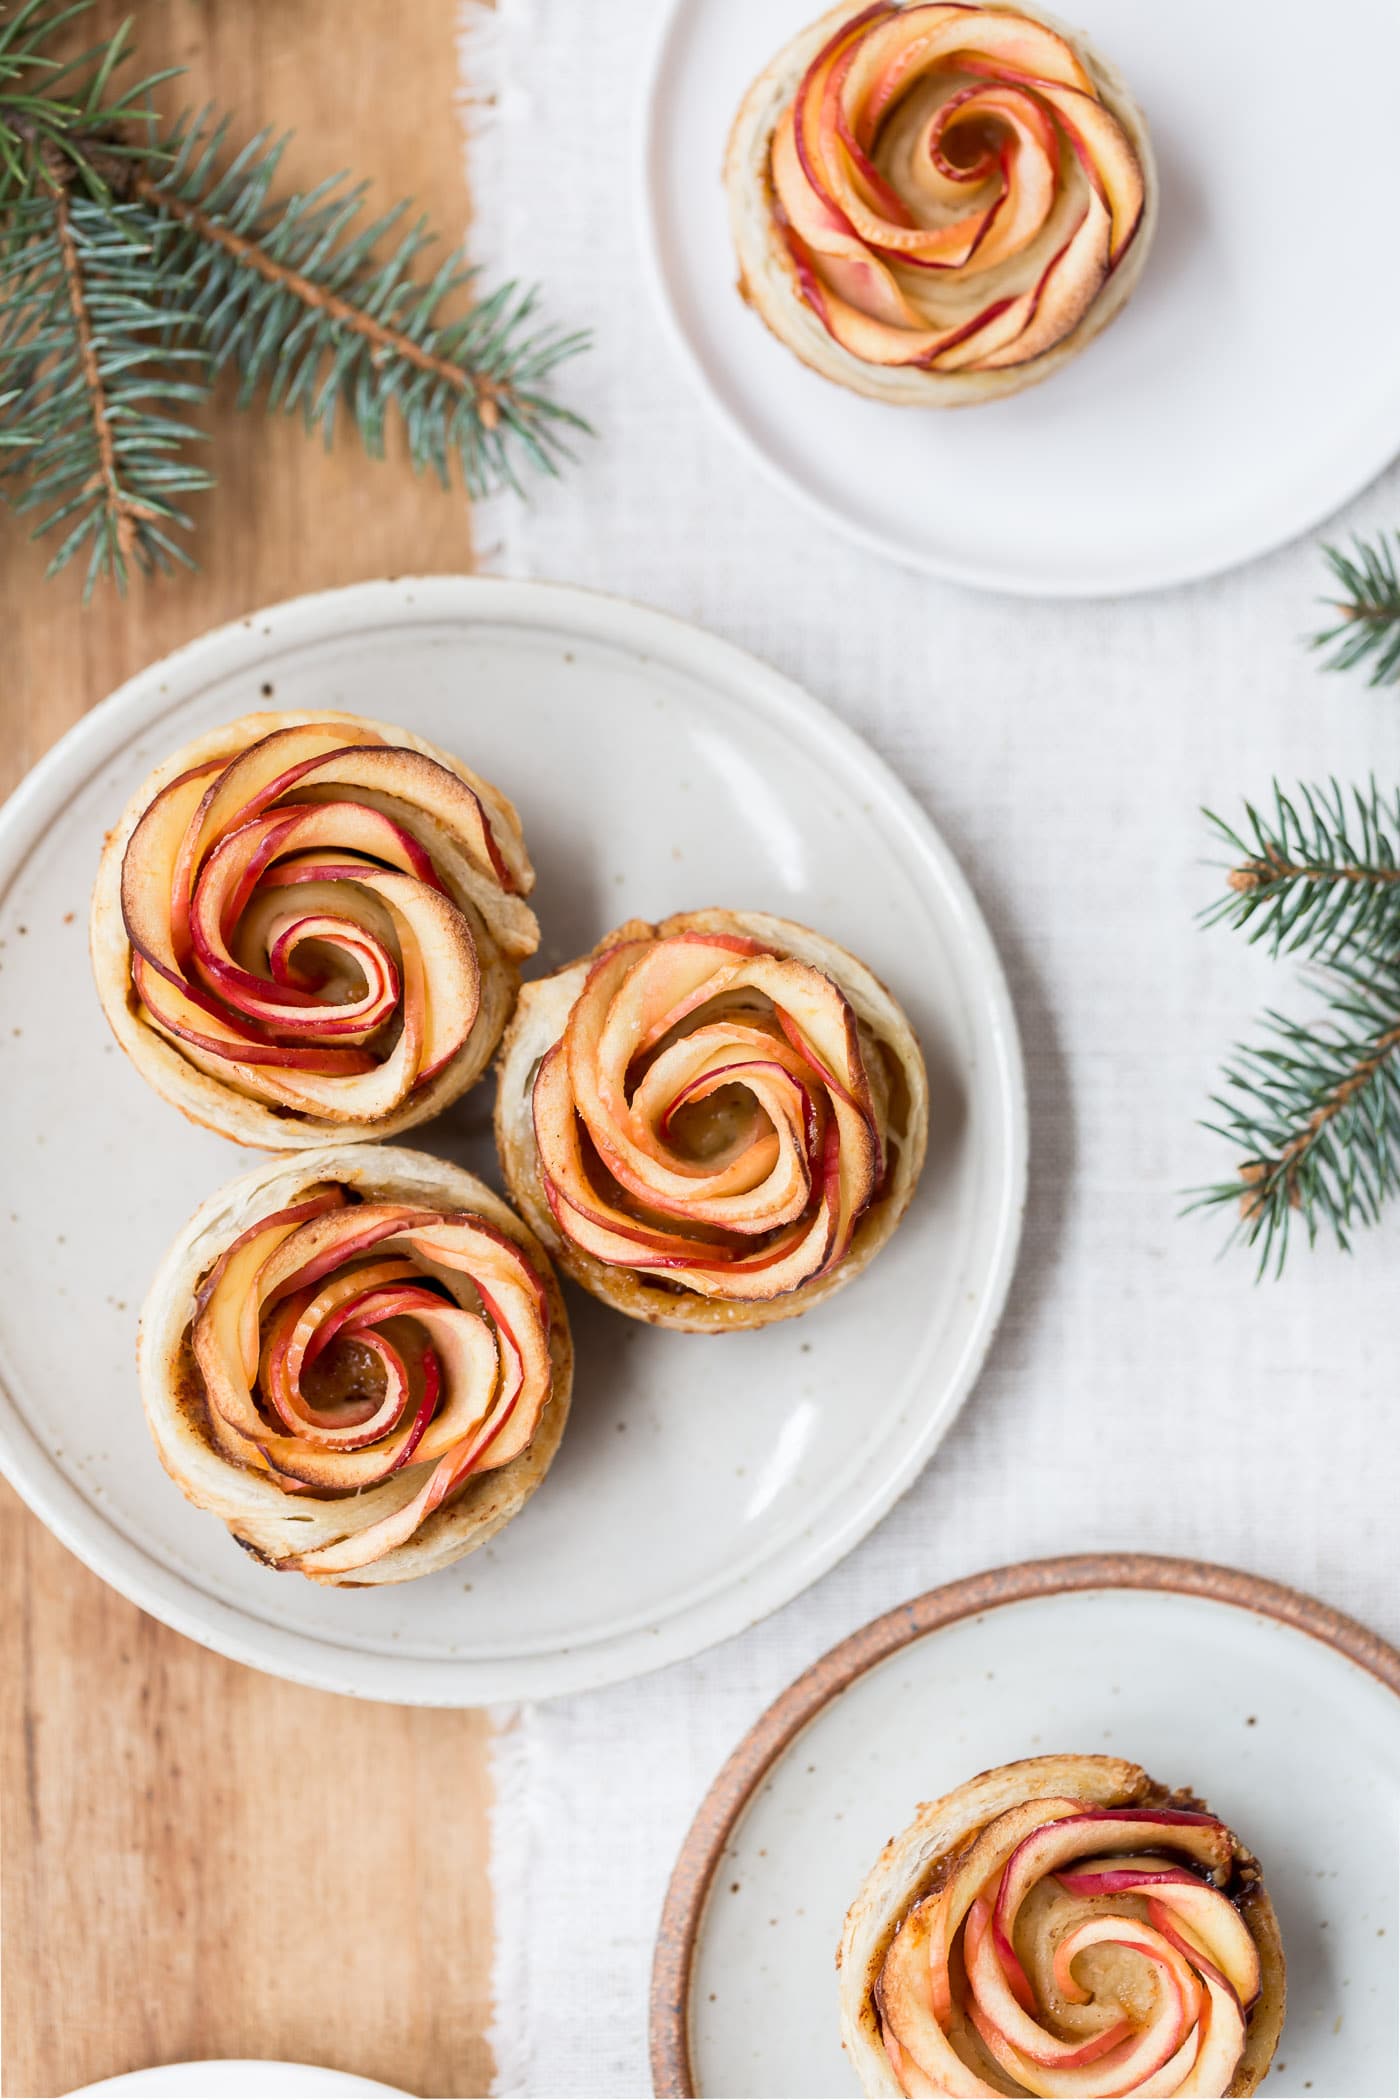 How to Make Apple Roses - Showcasing 3 finished apple roses from the top view.